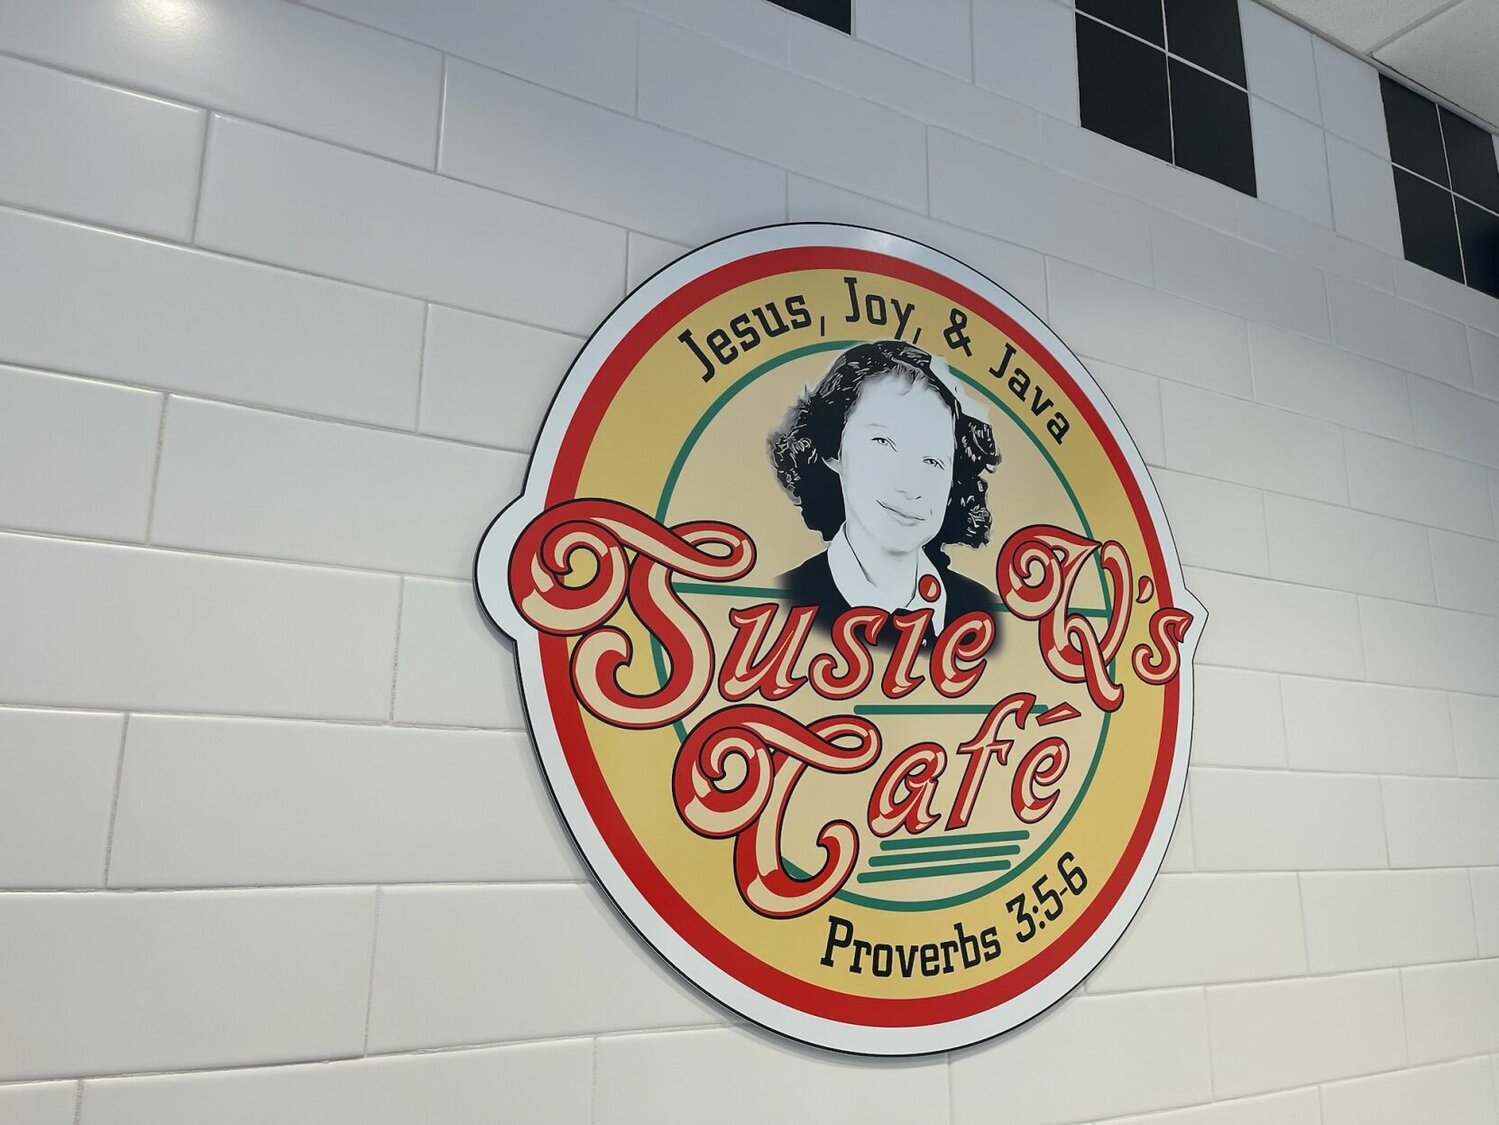 4.22 RHM OEW SusieQ


The Susie Q Cafe is named after the late Karen Hutchcraft who worked at Dairy Queen in Harrison as a teenager and loved making the “curl” on the ice cream cones.